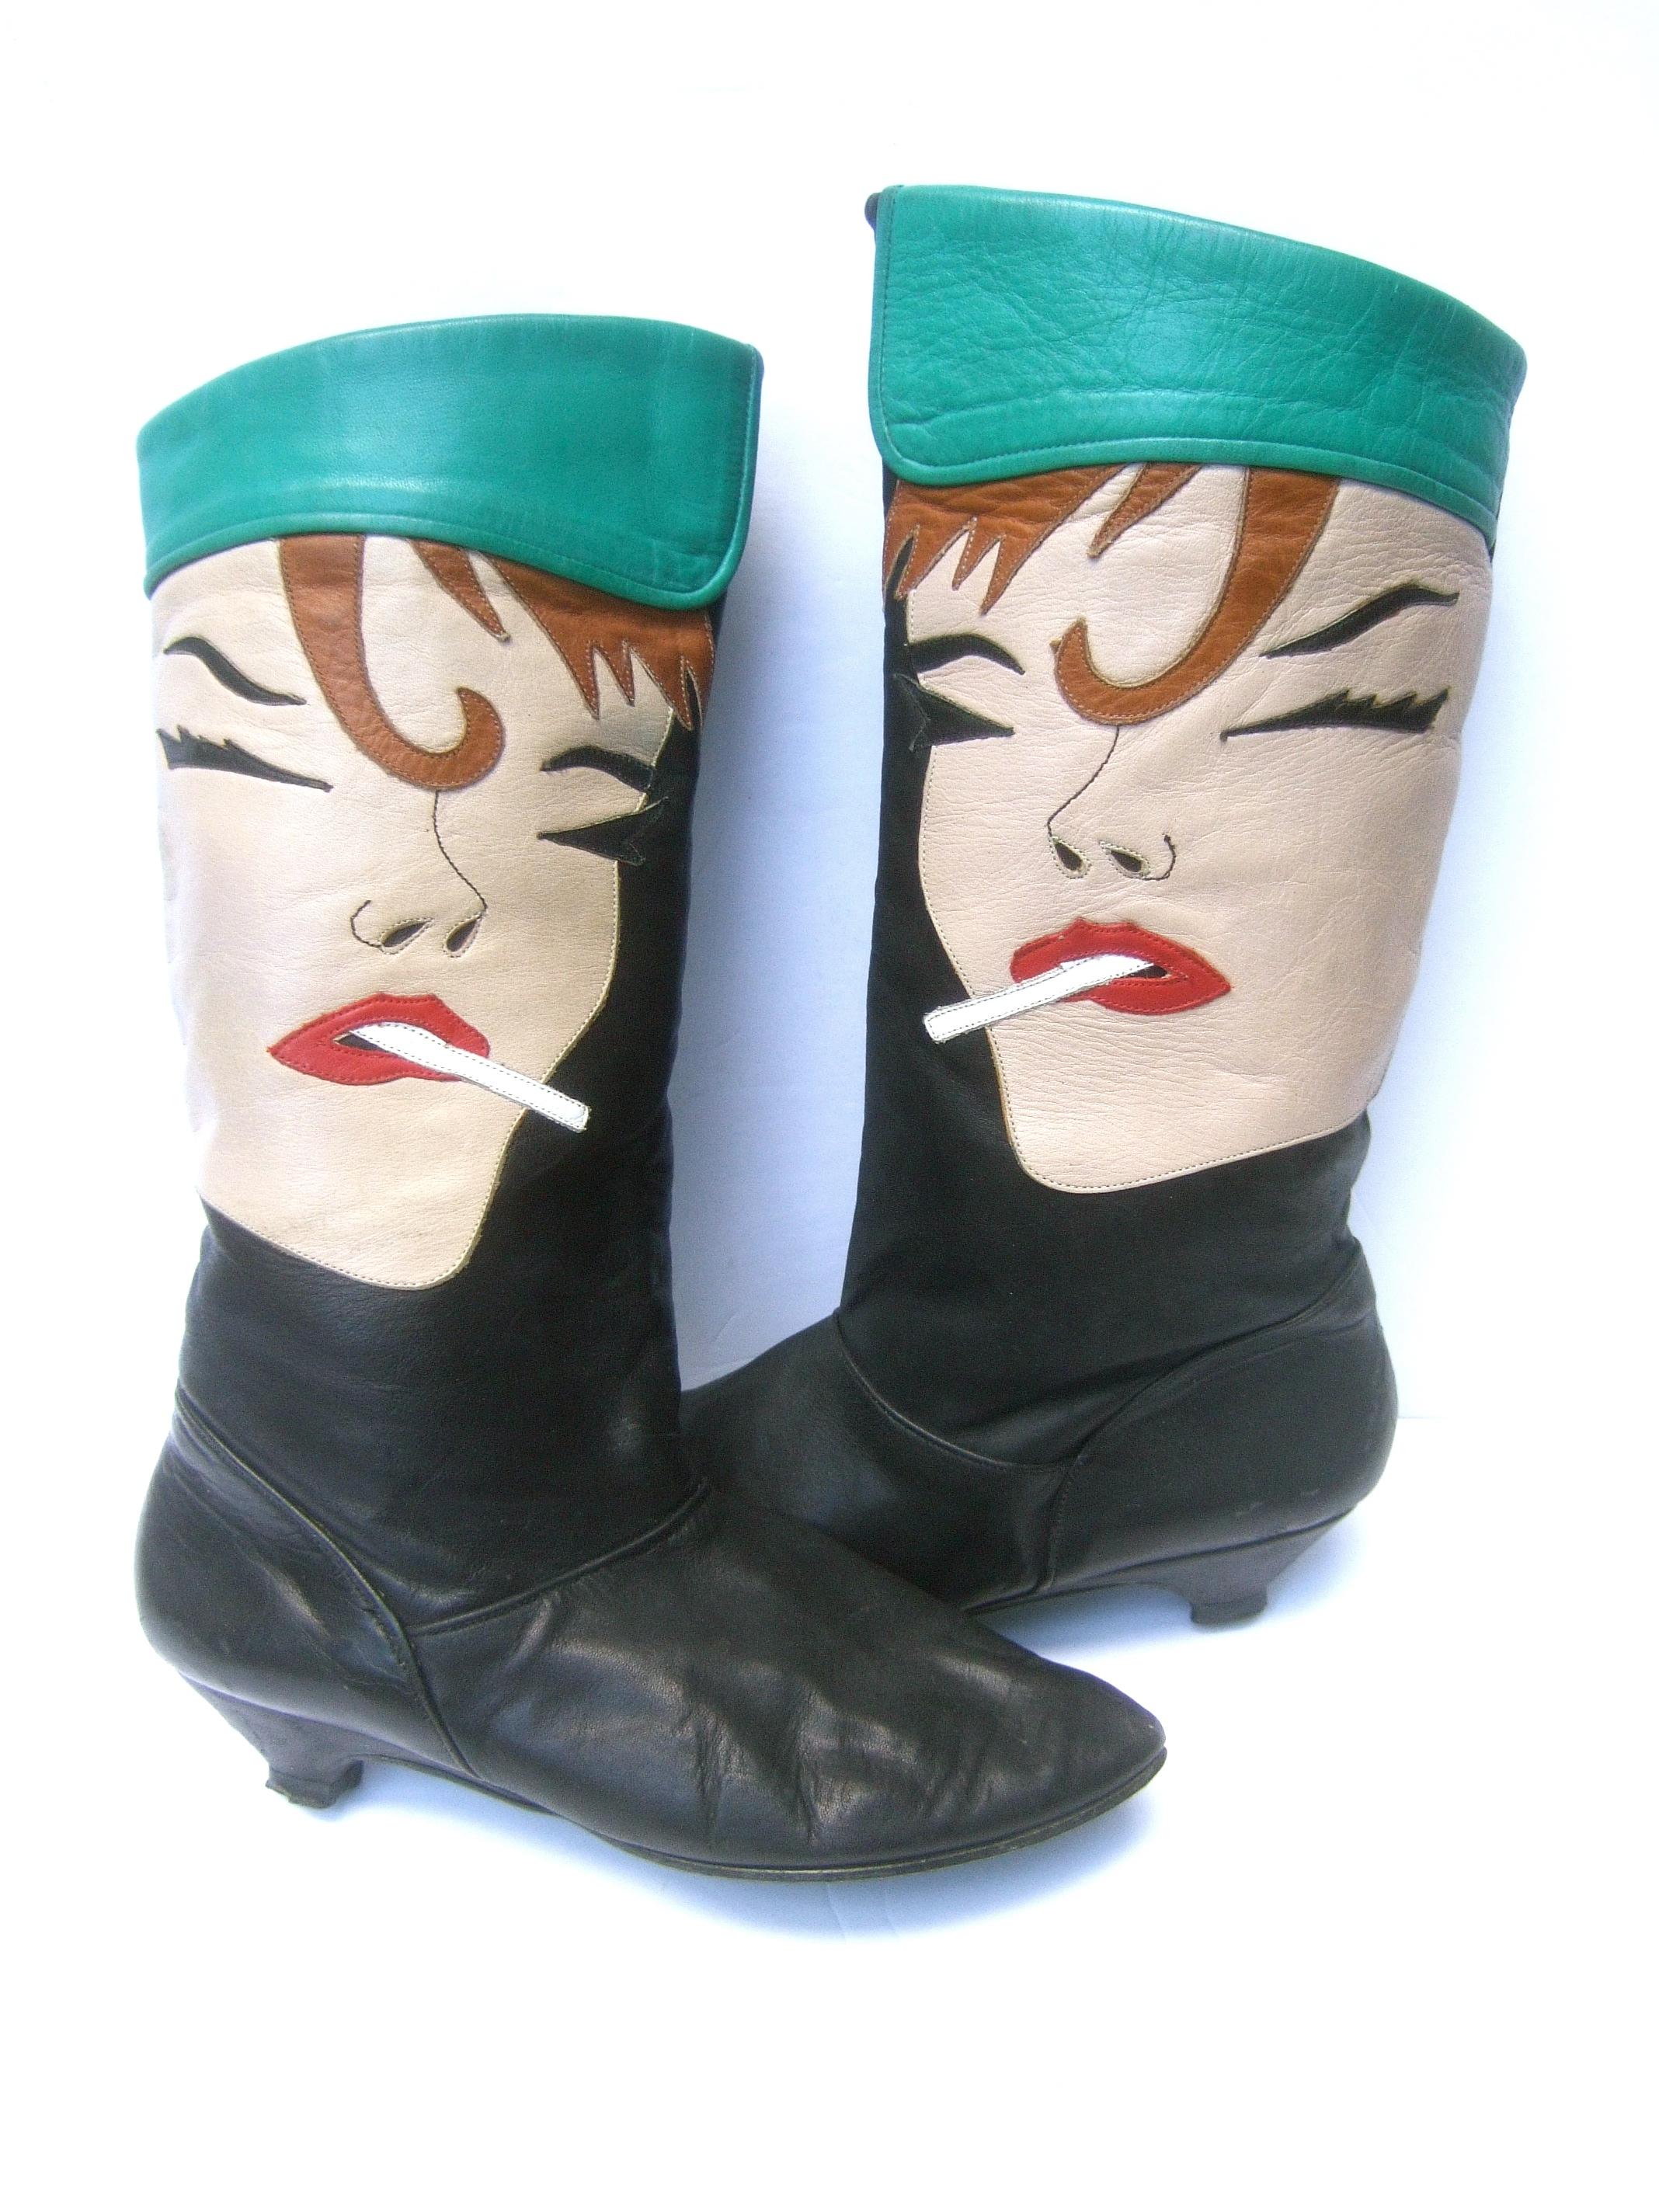 Mod Edgy Pop Art Leather Boots Designed by Zalo c 1980s 10